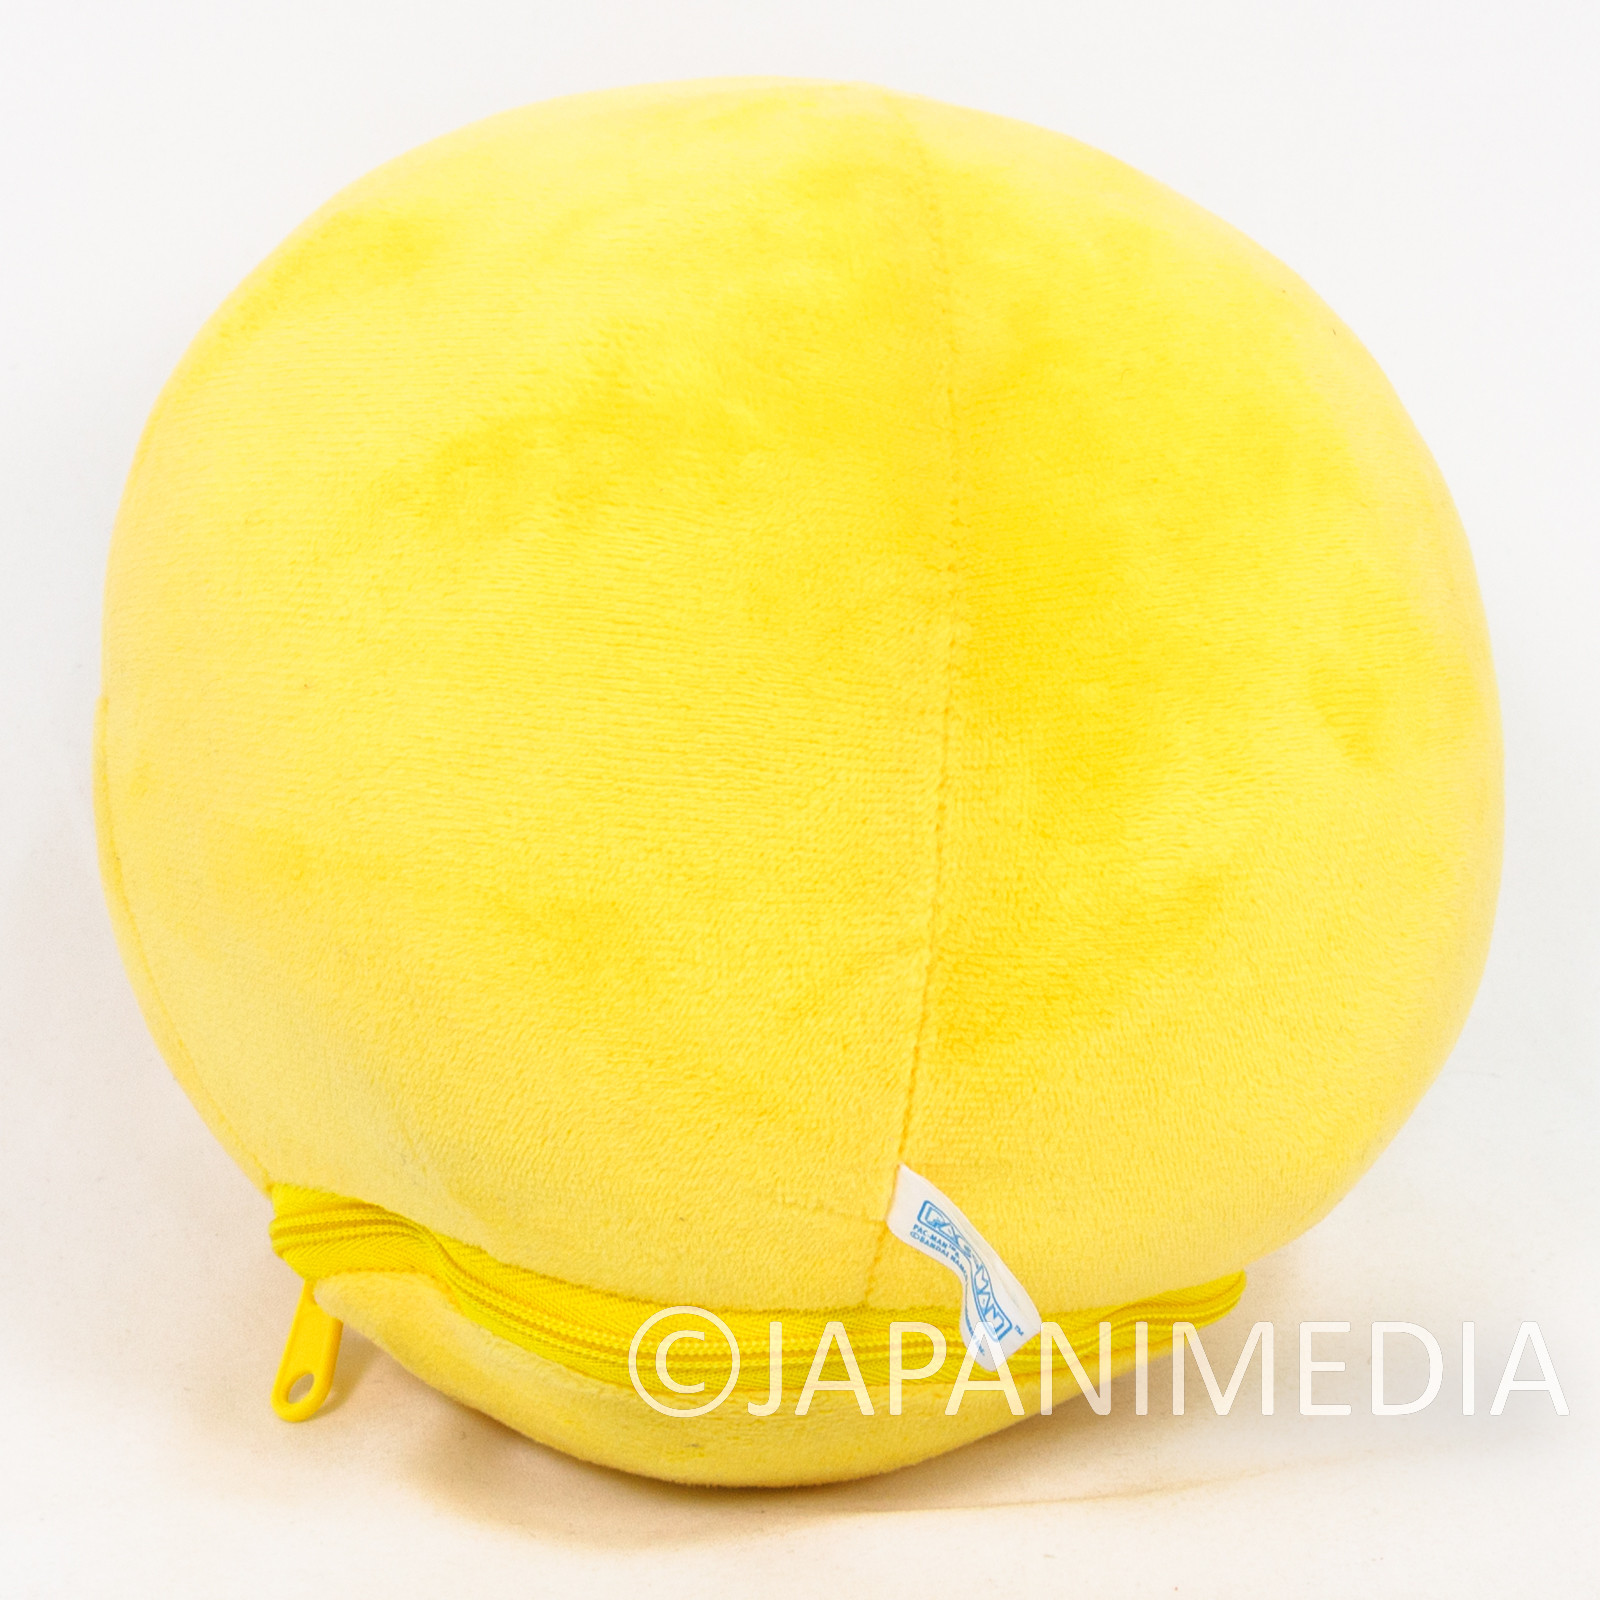 Pac-Man Battery-Operated Moving Plush Toy/ PAC-LAND NAMCO FAMICOM